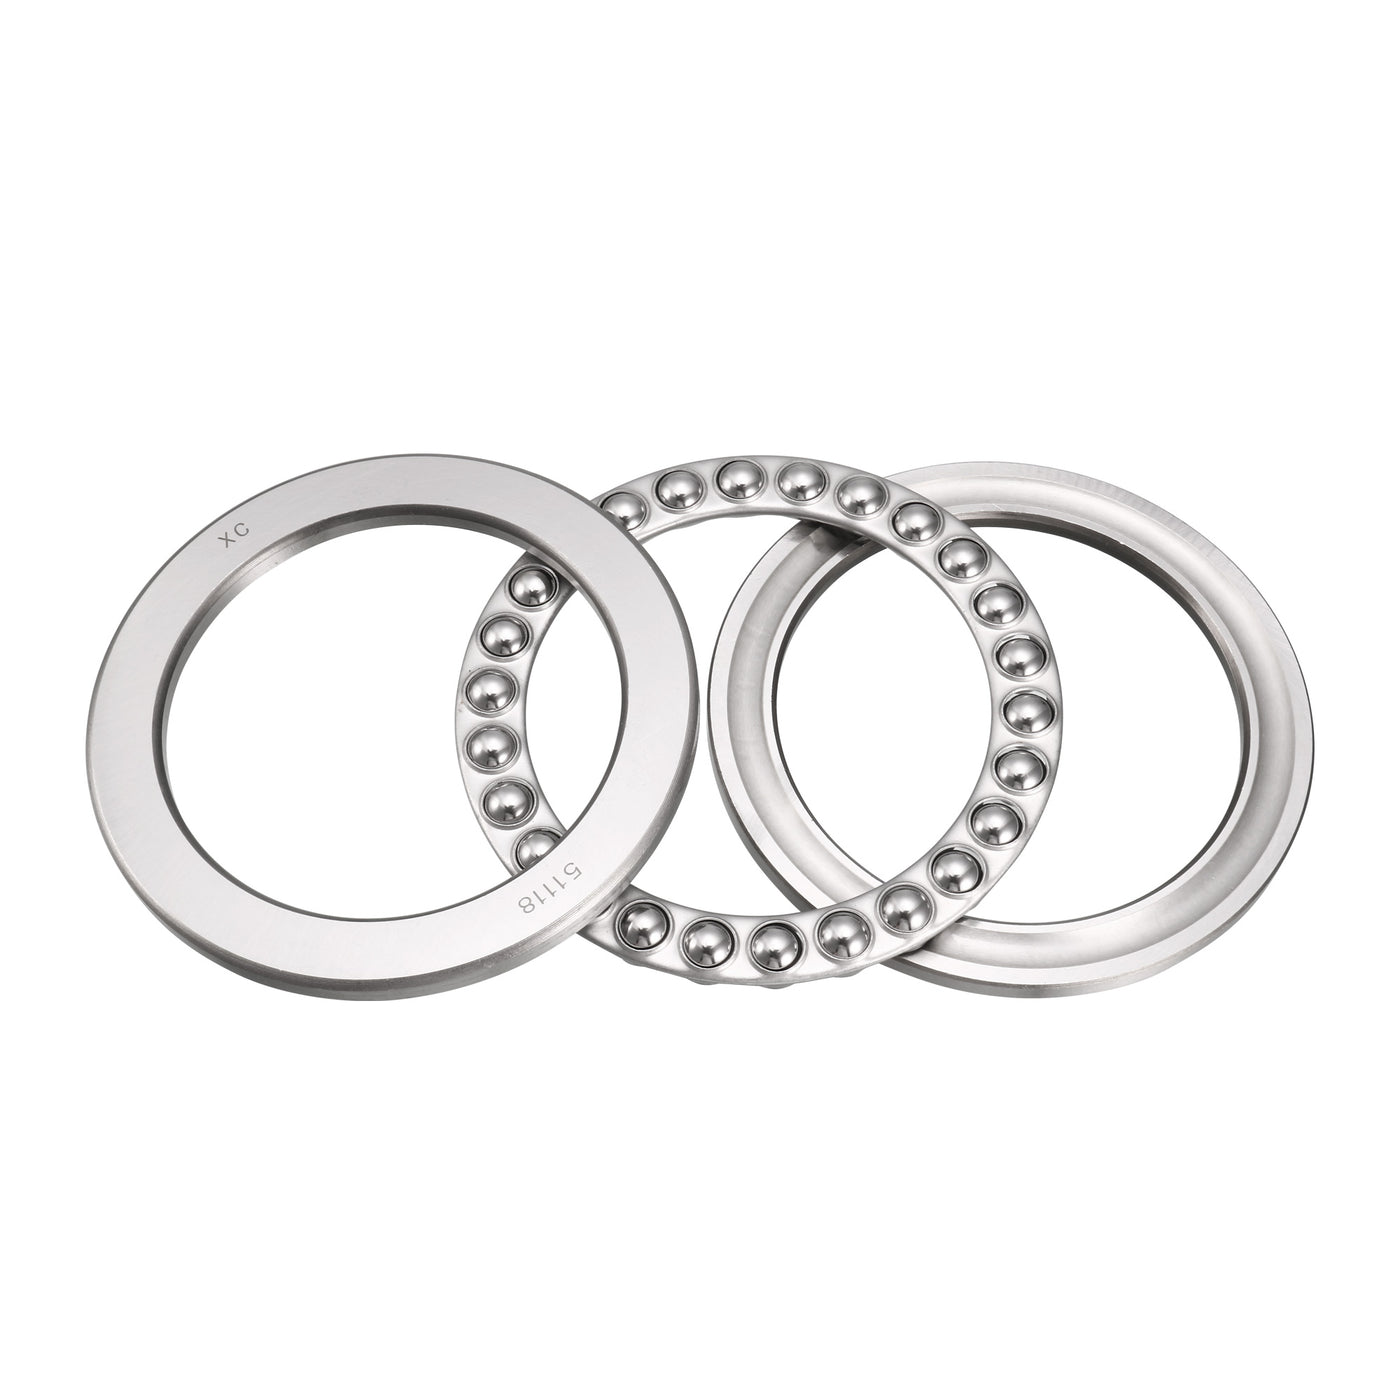 uxcell Uxcell 51118 Miniature Thrust Ball Bearing P0 90x120x22mm Chrome Steel with Washer